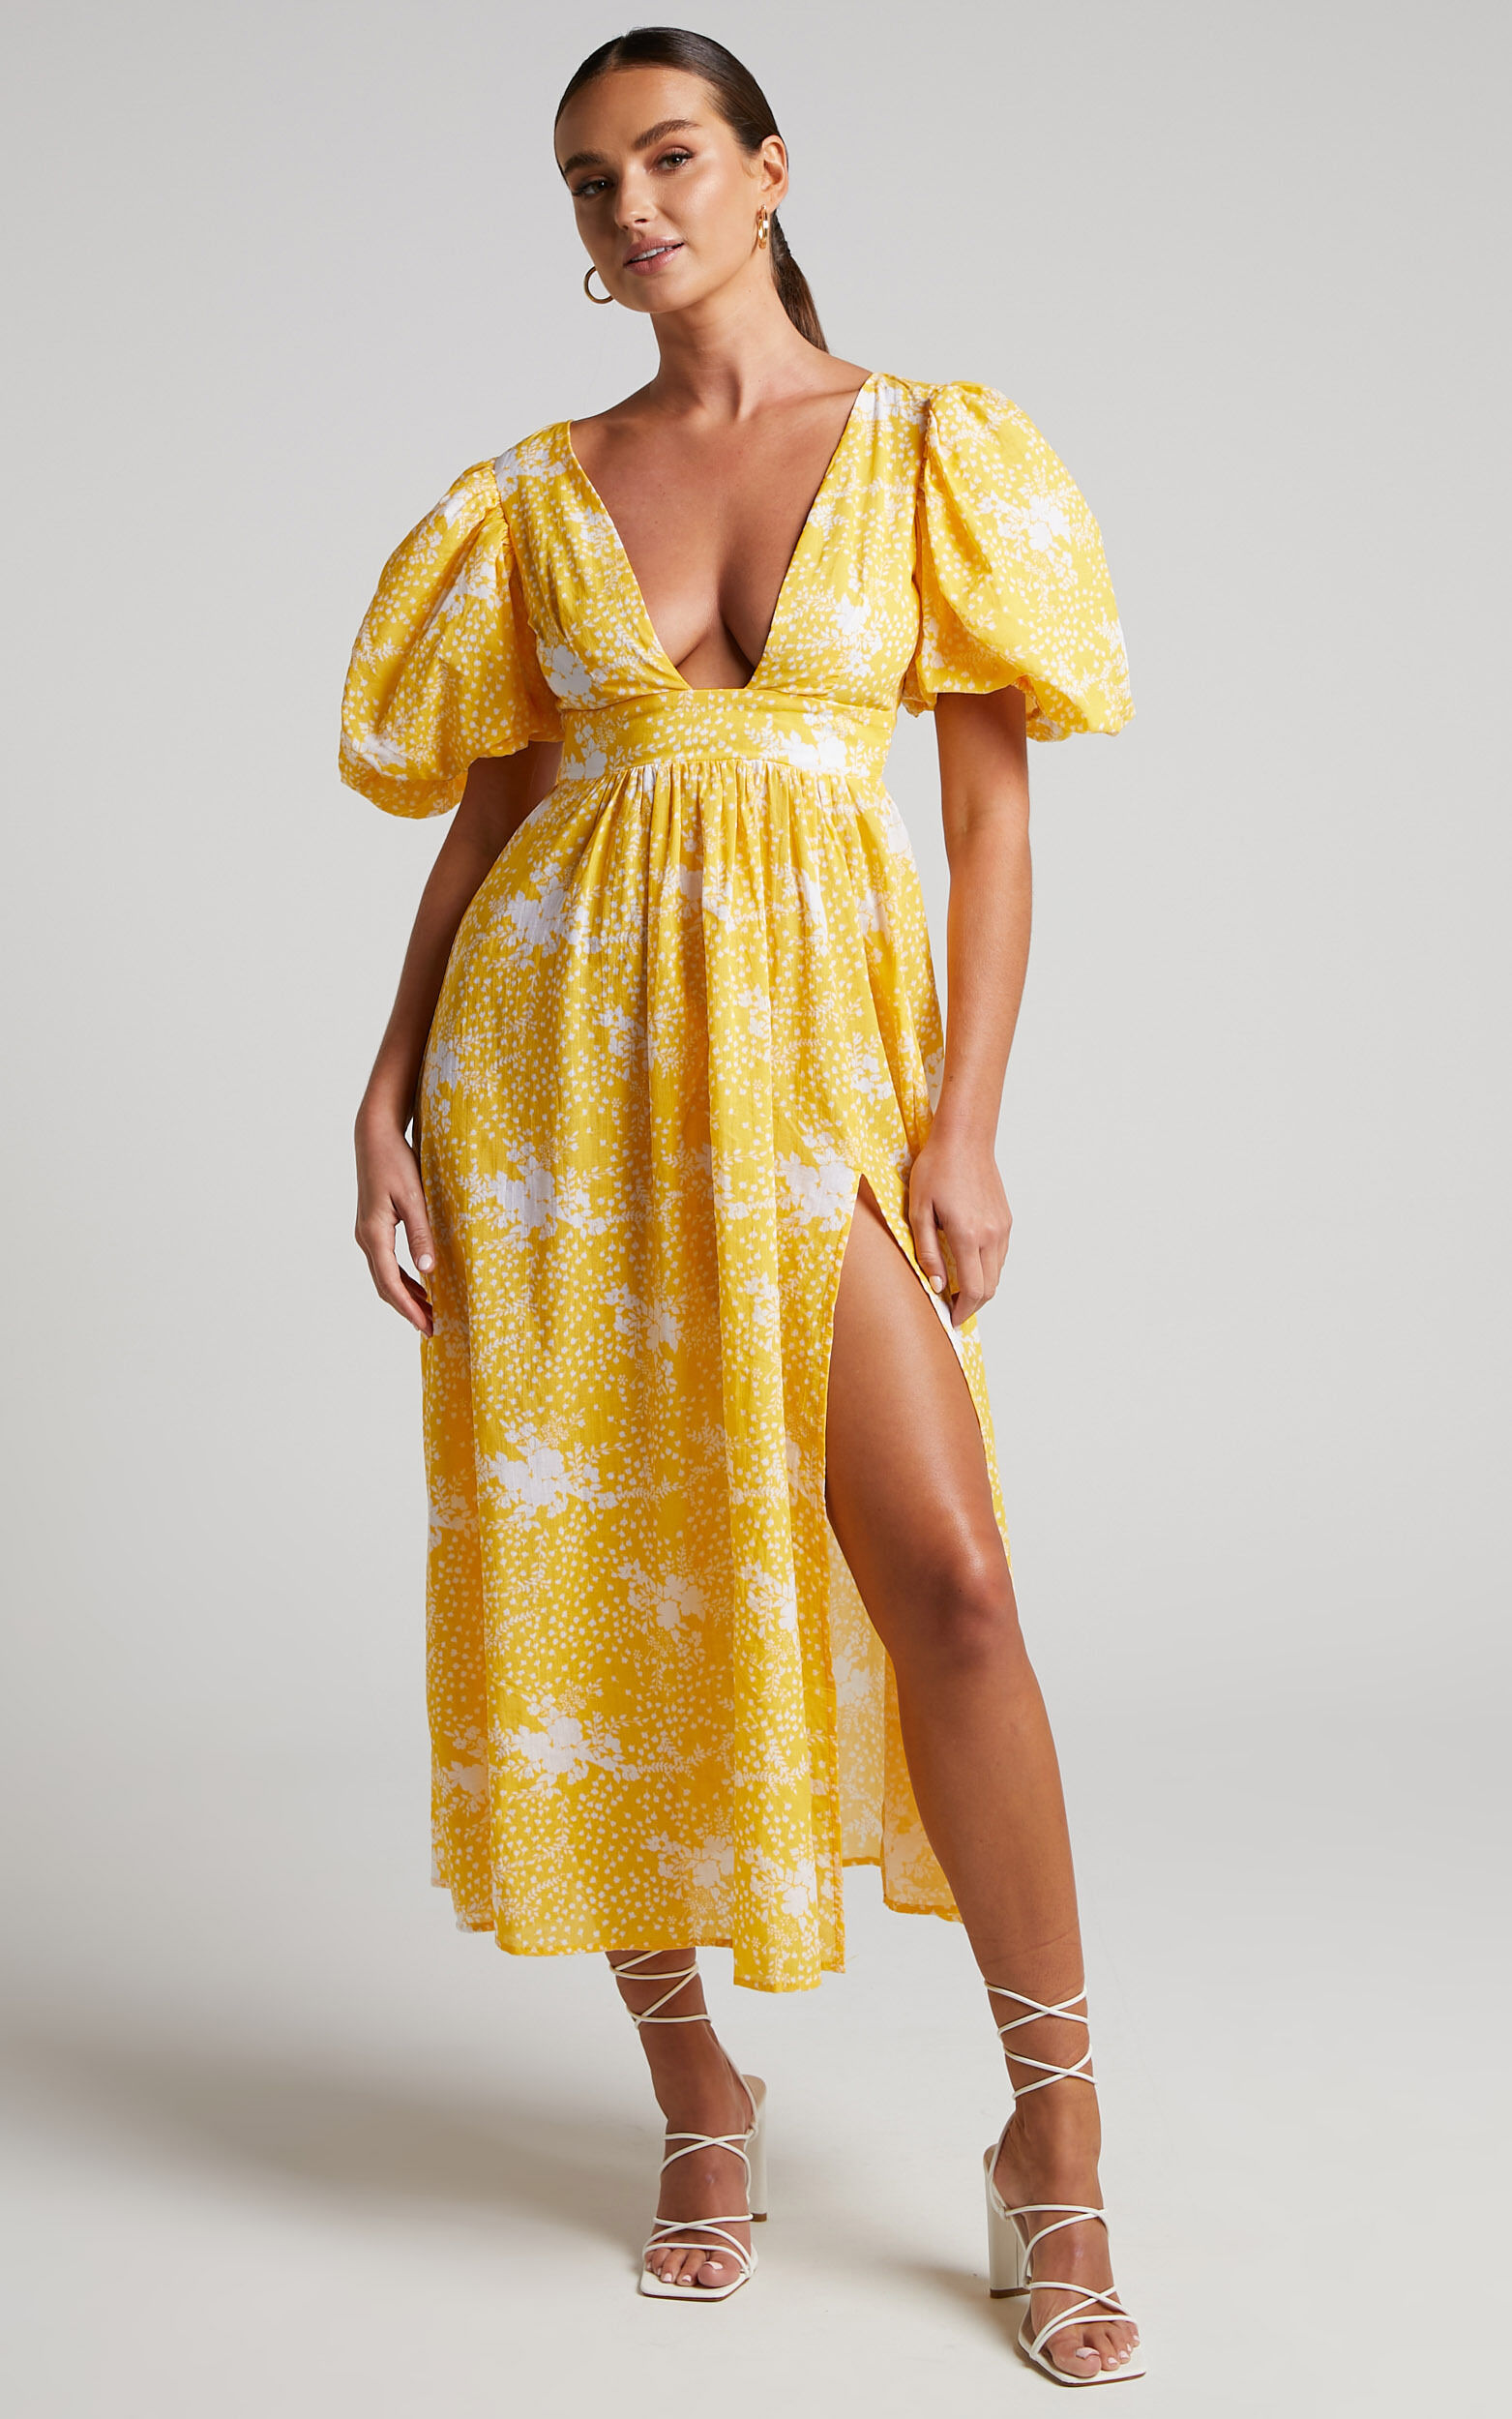 Ailiza Midi Dress - Puff Sleeve Open Back Dress in Yellow Floral - 06, YEL1, super-hi-res image number null